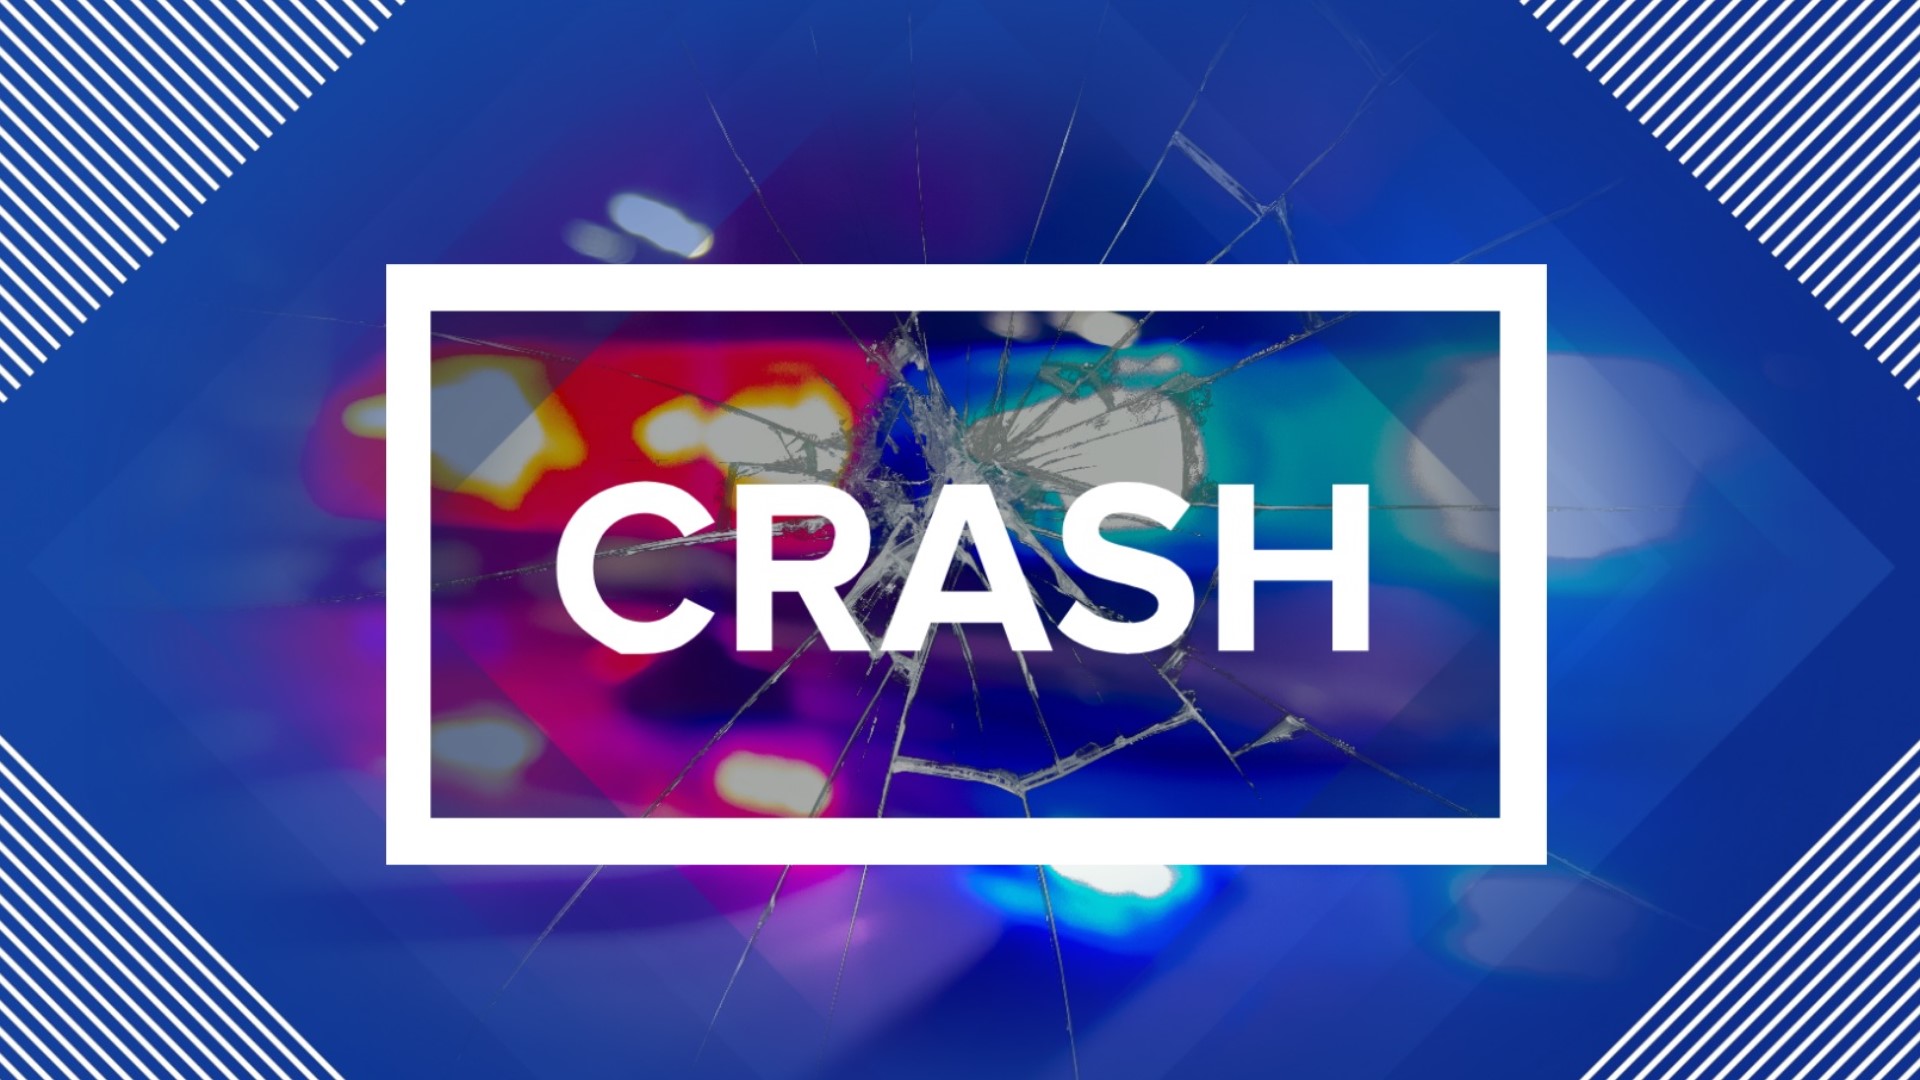 The crash happened along Route 209 near Brodheadsville Monday morning.